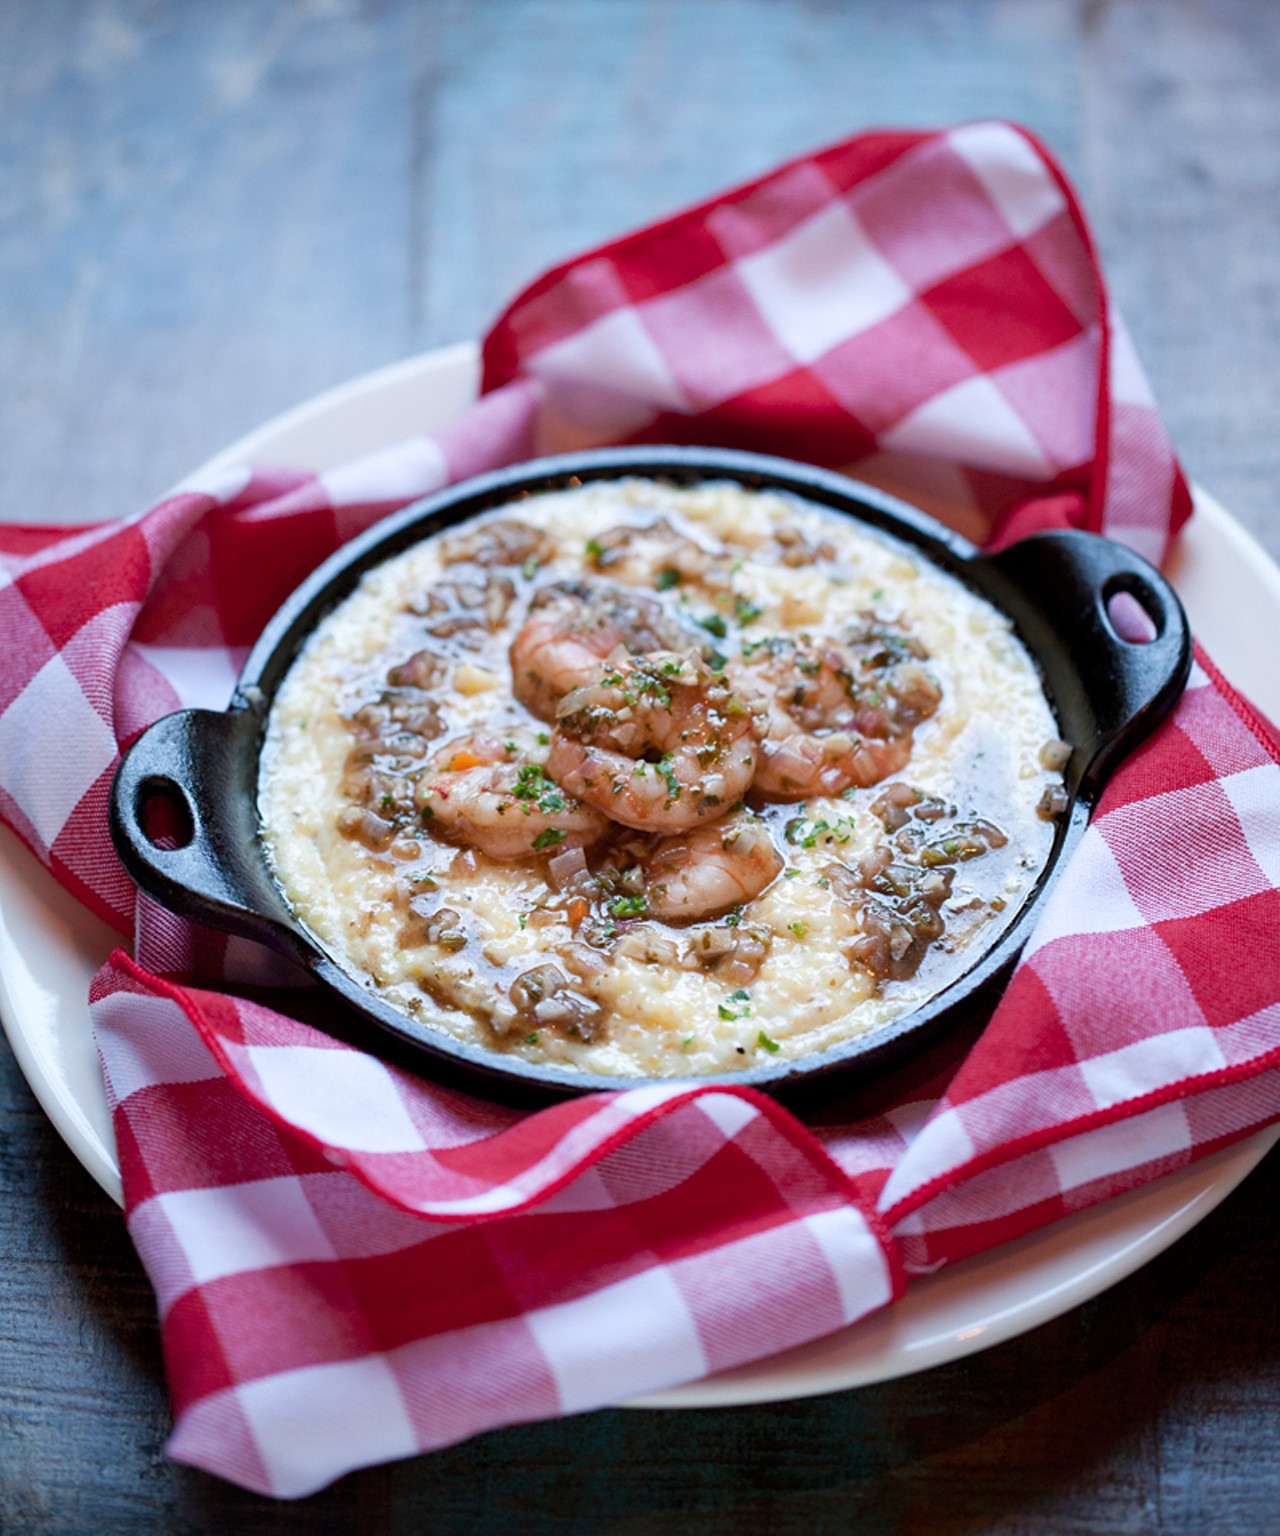 The shrimp and grits are served with Louisiana-style barbecue shrimp and Tillamook cheddar stone-ground grits.